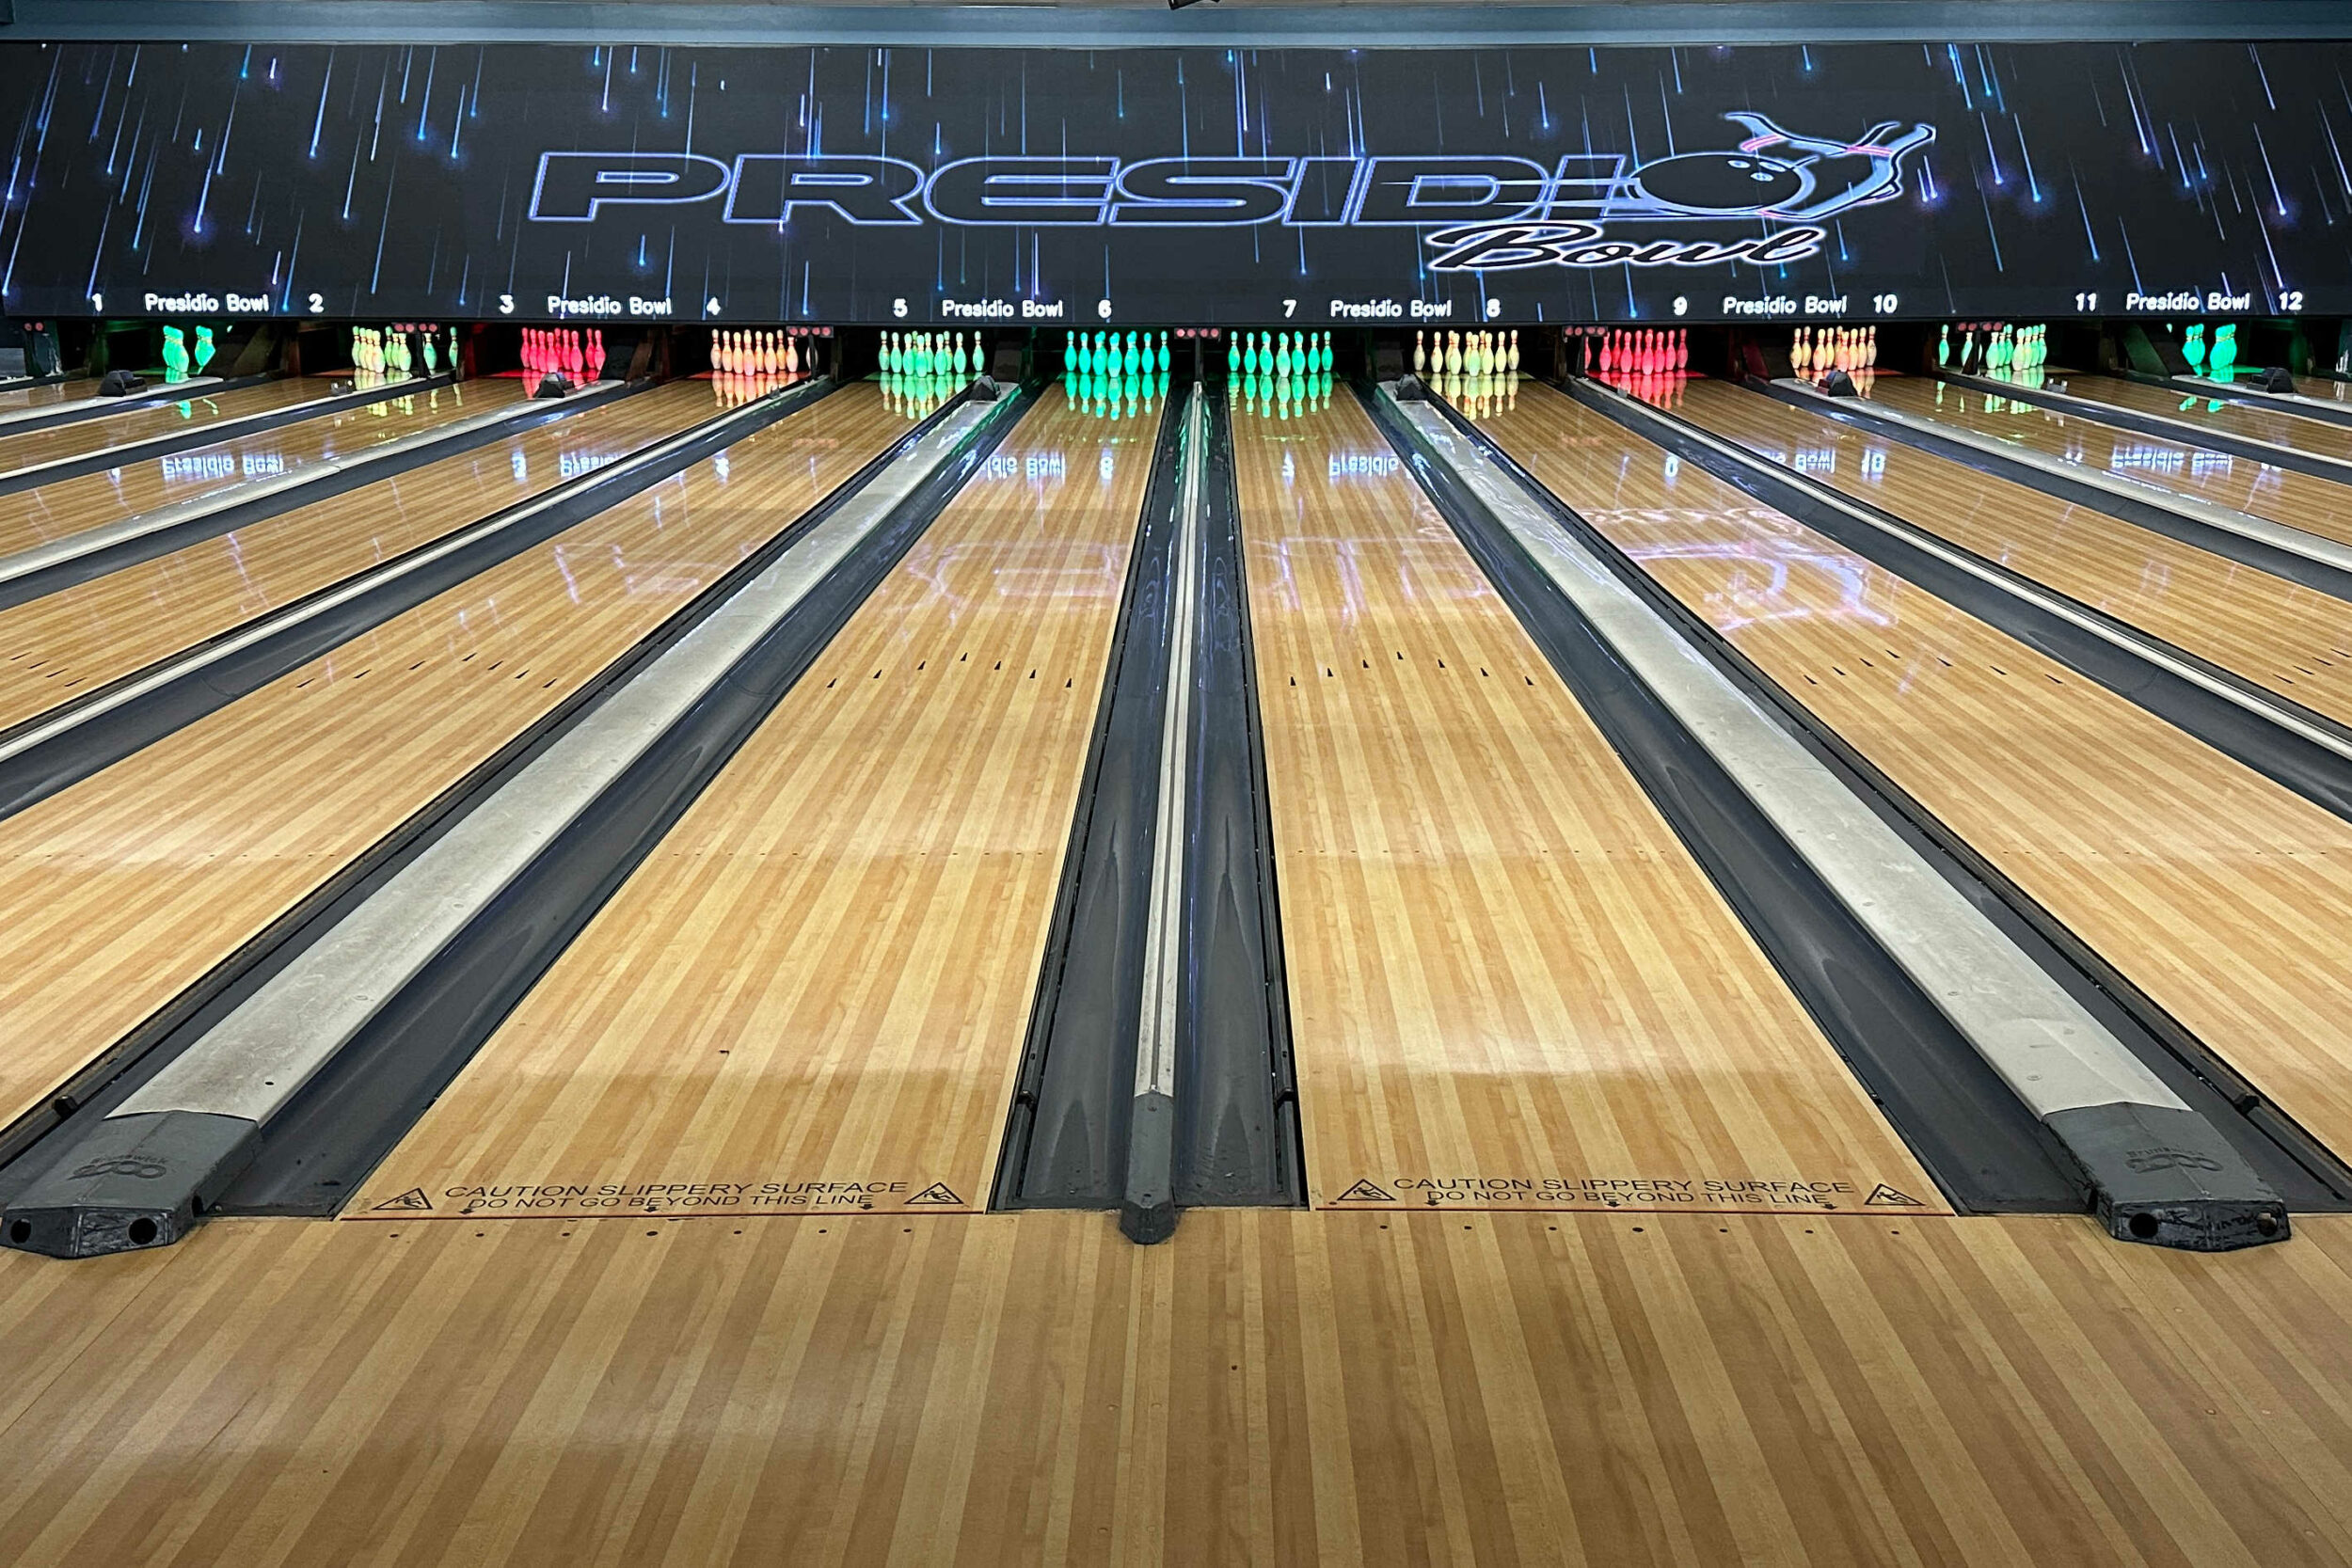 Bowling lanes with colored pins lined up under the words Presidio Bowl.